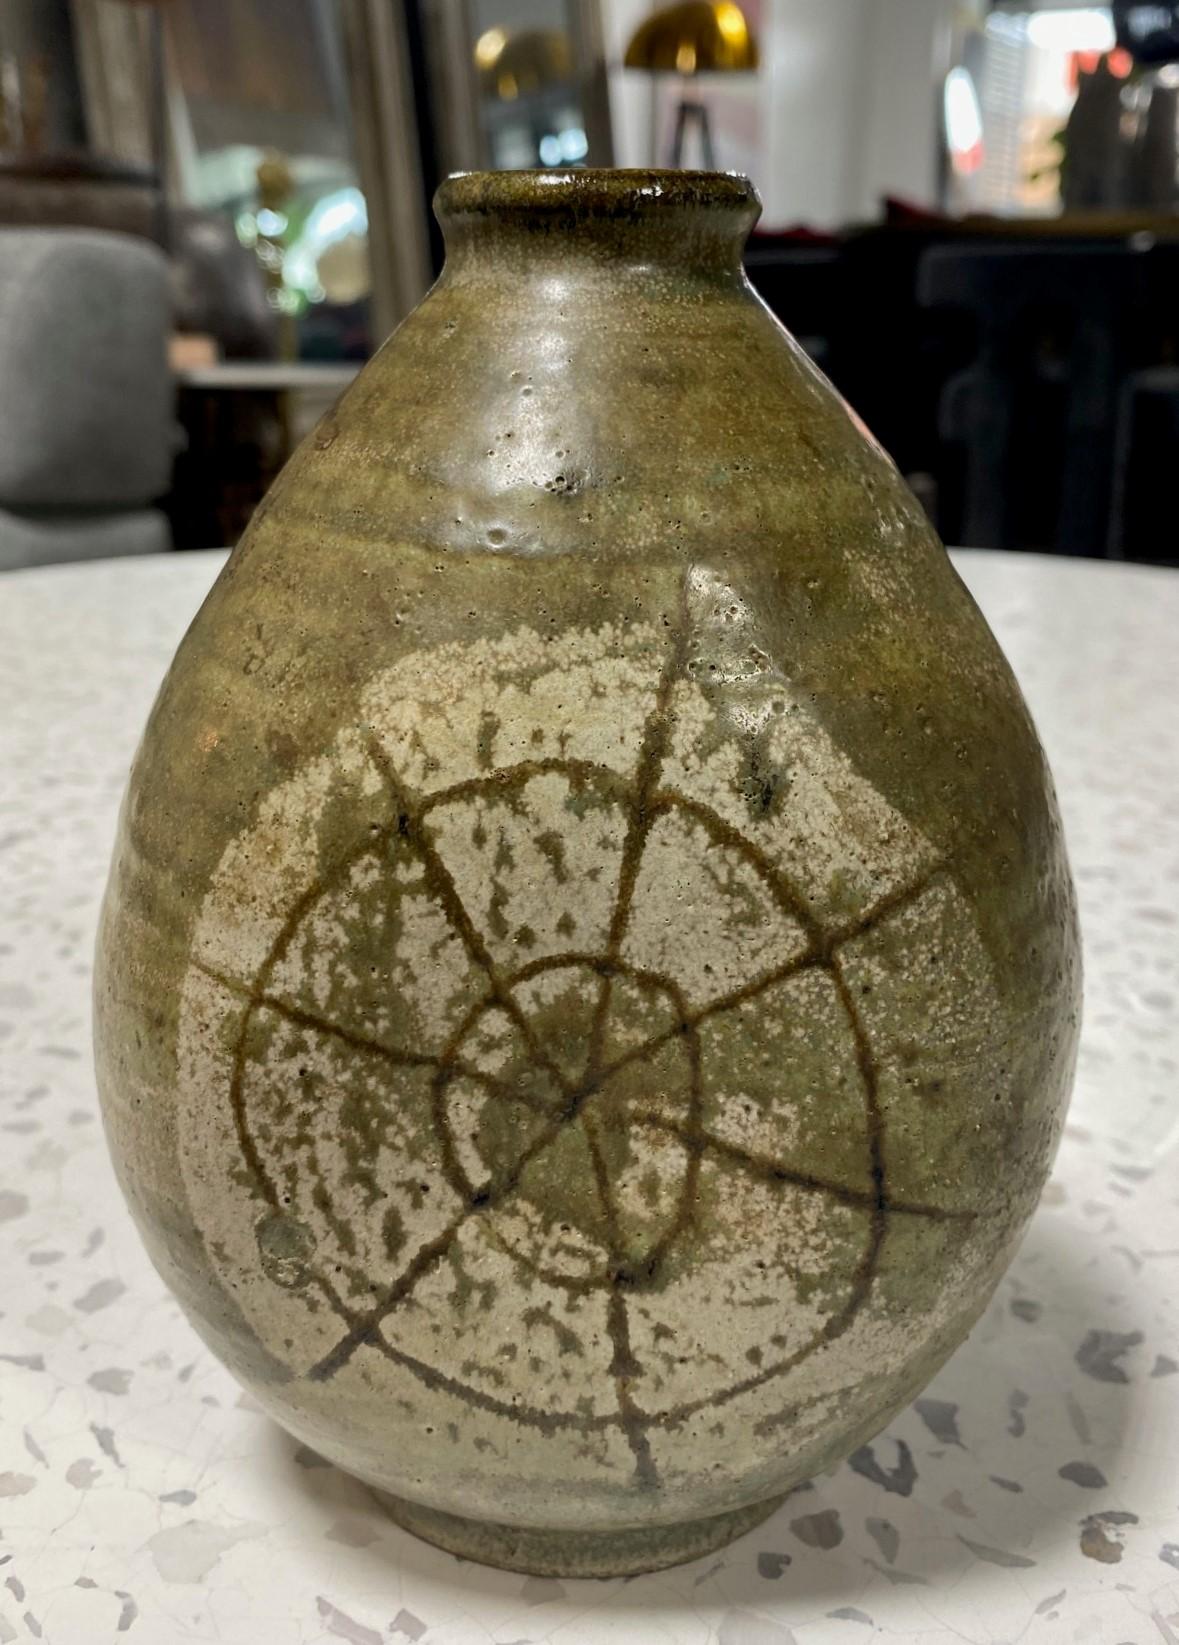 A gorgeous Mid-Century Modern stoneware vase by master potter/artist Frances Senska featuring a beautiful three-sided design, hand-decorated artwork/pattern, and a wonderful earth-tone glaze. 

Frances Senska was a professor who was called the